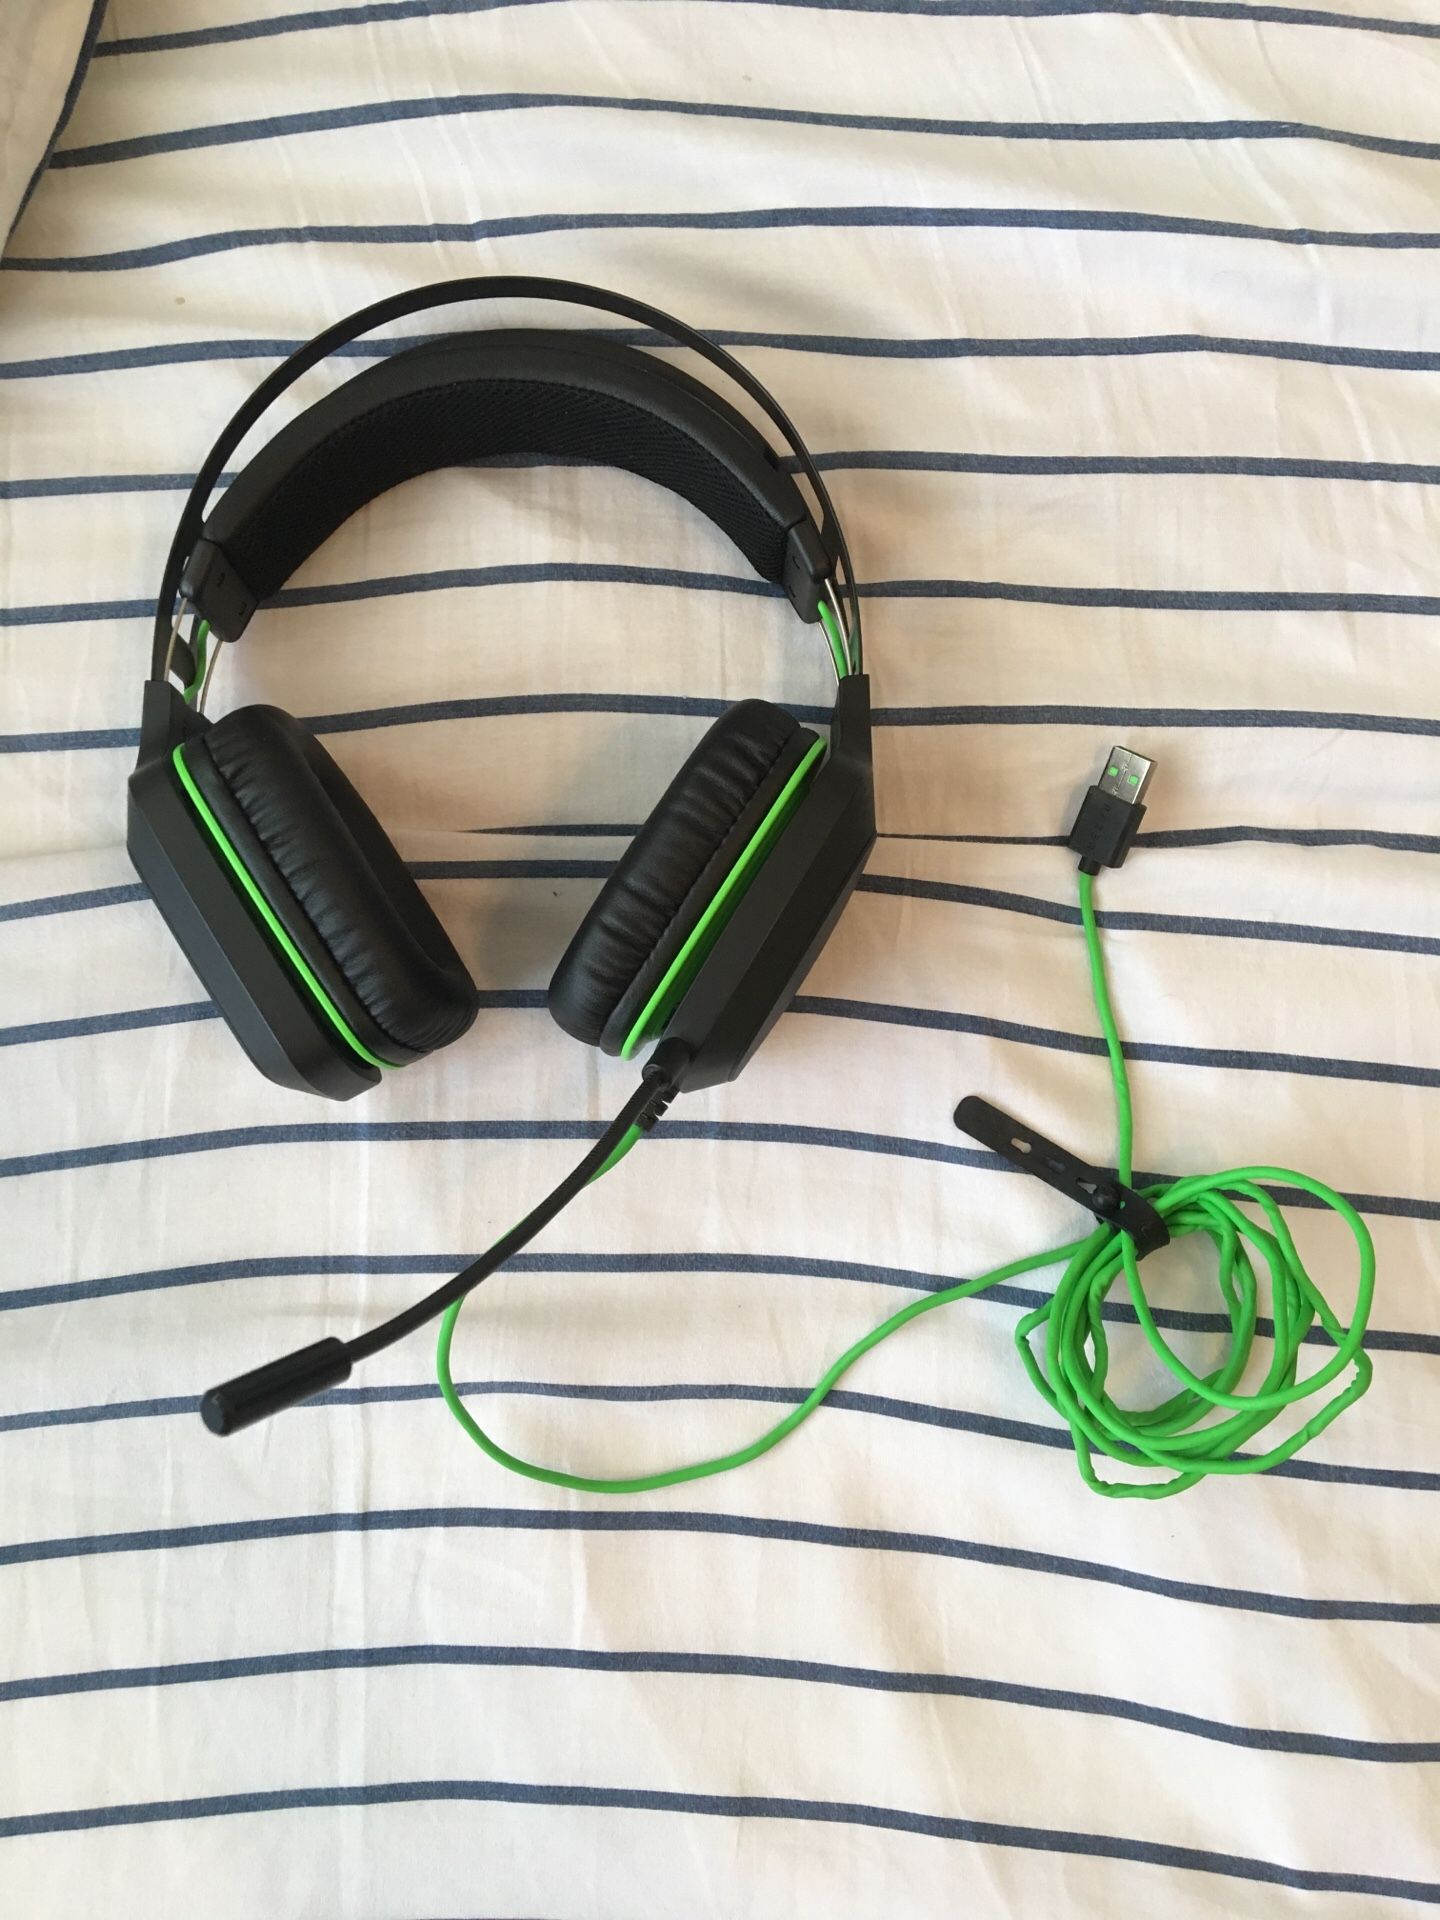 Razer Gaming Headset With Mic-USB Cable